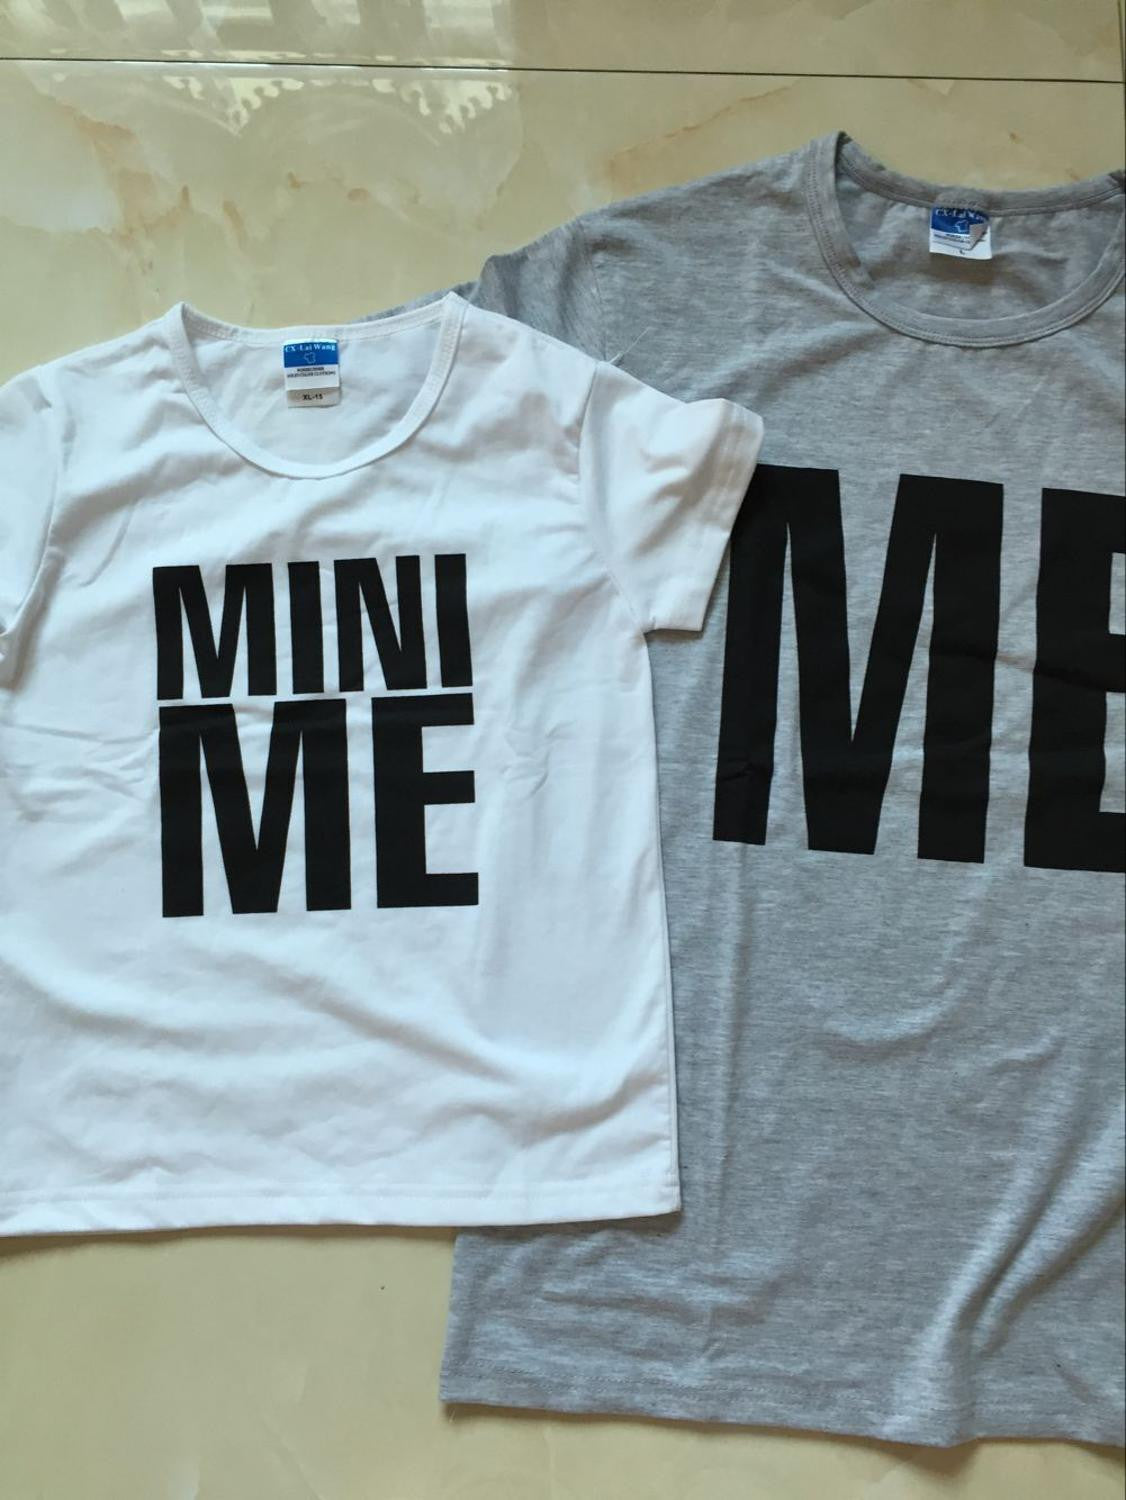 summer family matching outfits letter me mini me father and son clothes cotton family look T- shirt family matching clothes-Dollar Bargains Online Shopping Australia